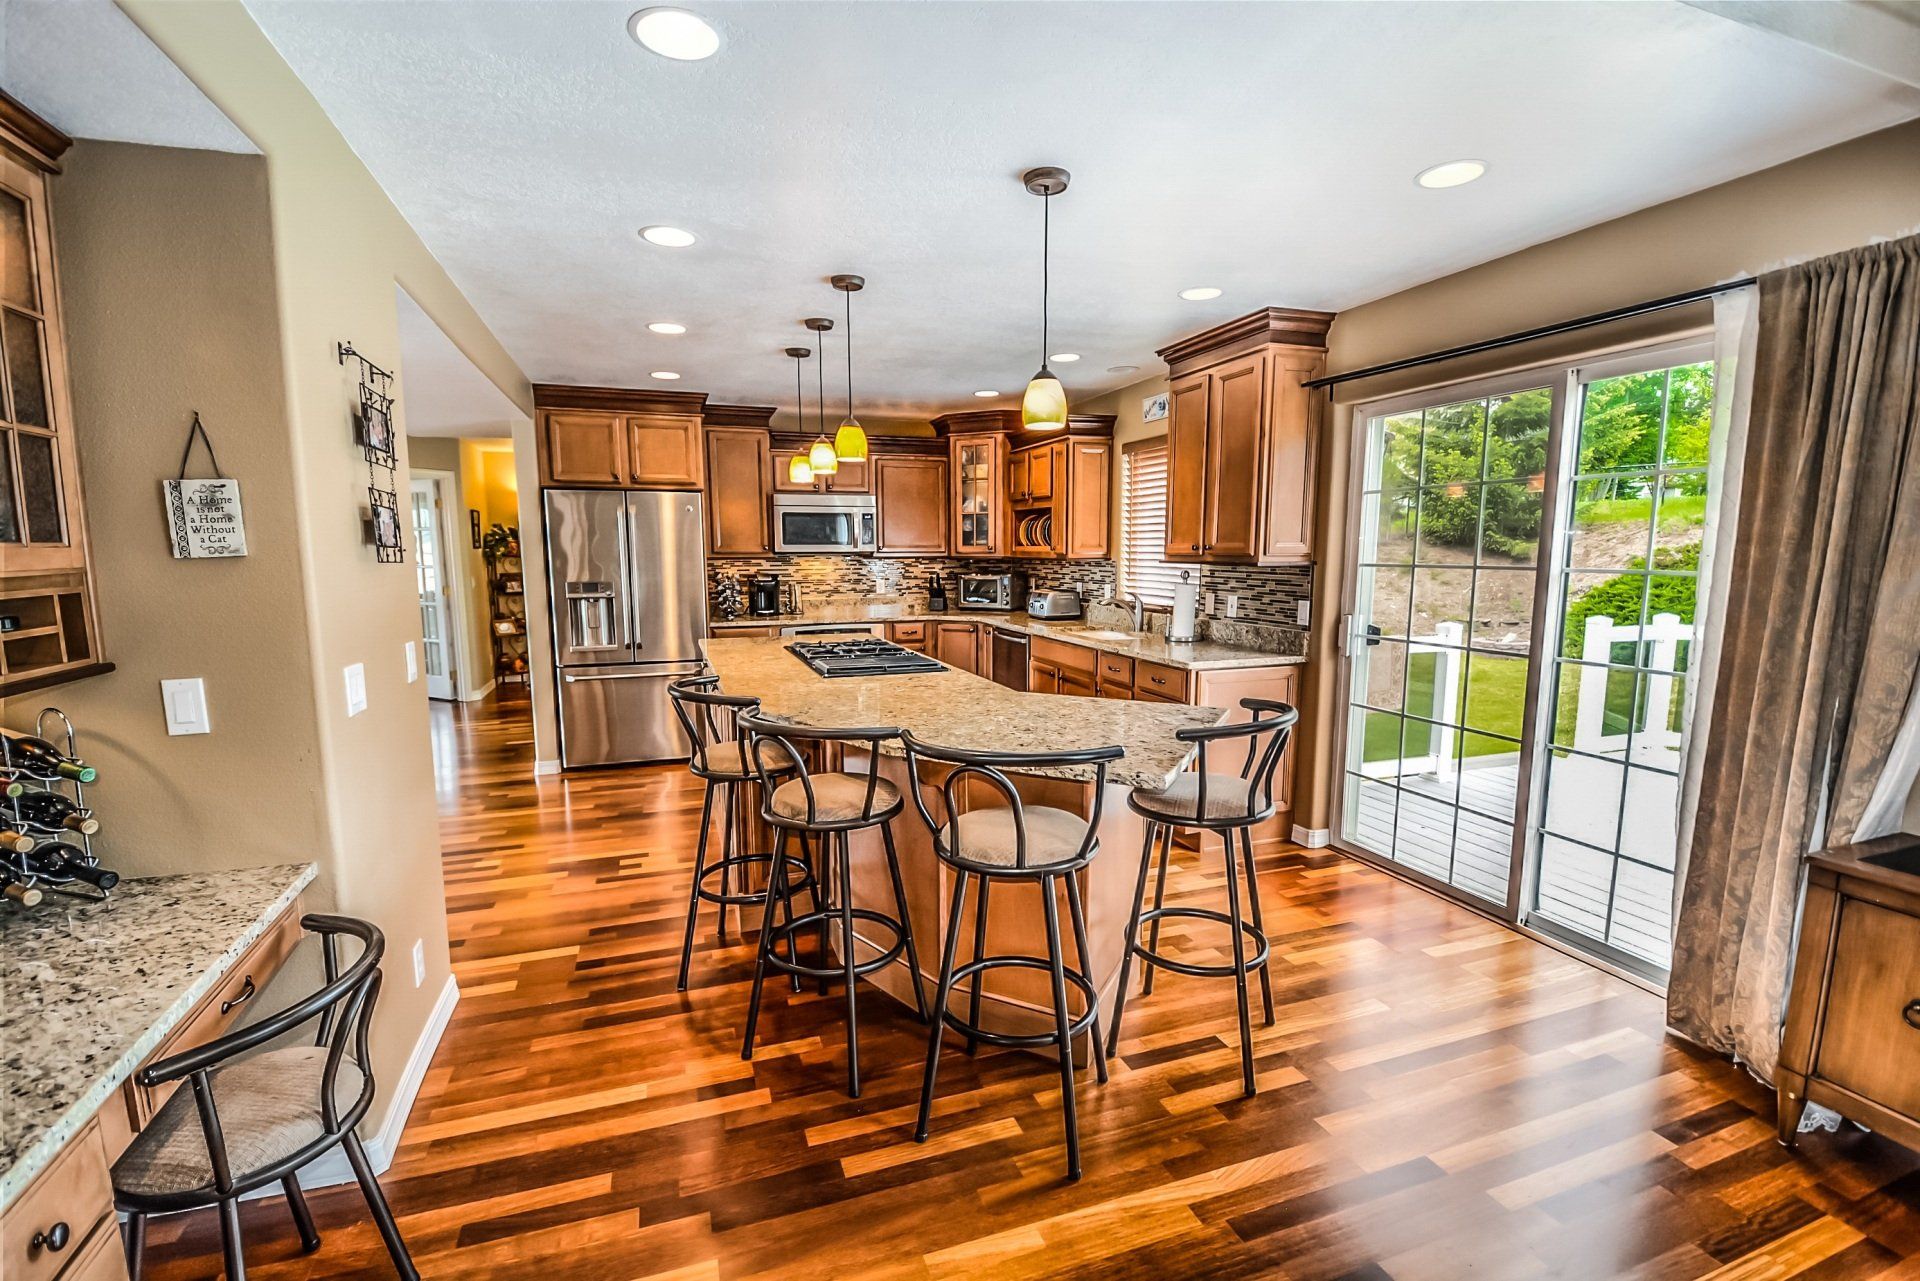 Transform Your Home With Austin's Premier Hardwood Flooring Solutions